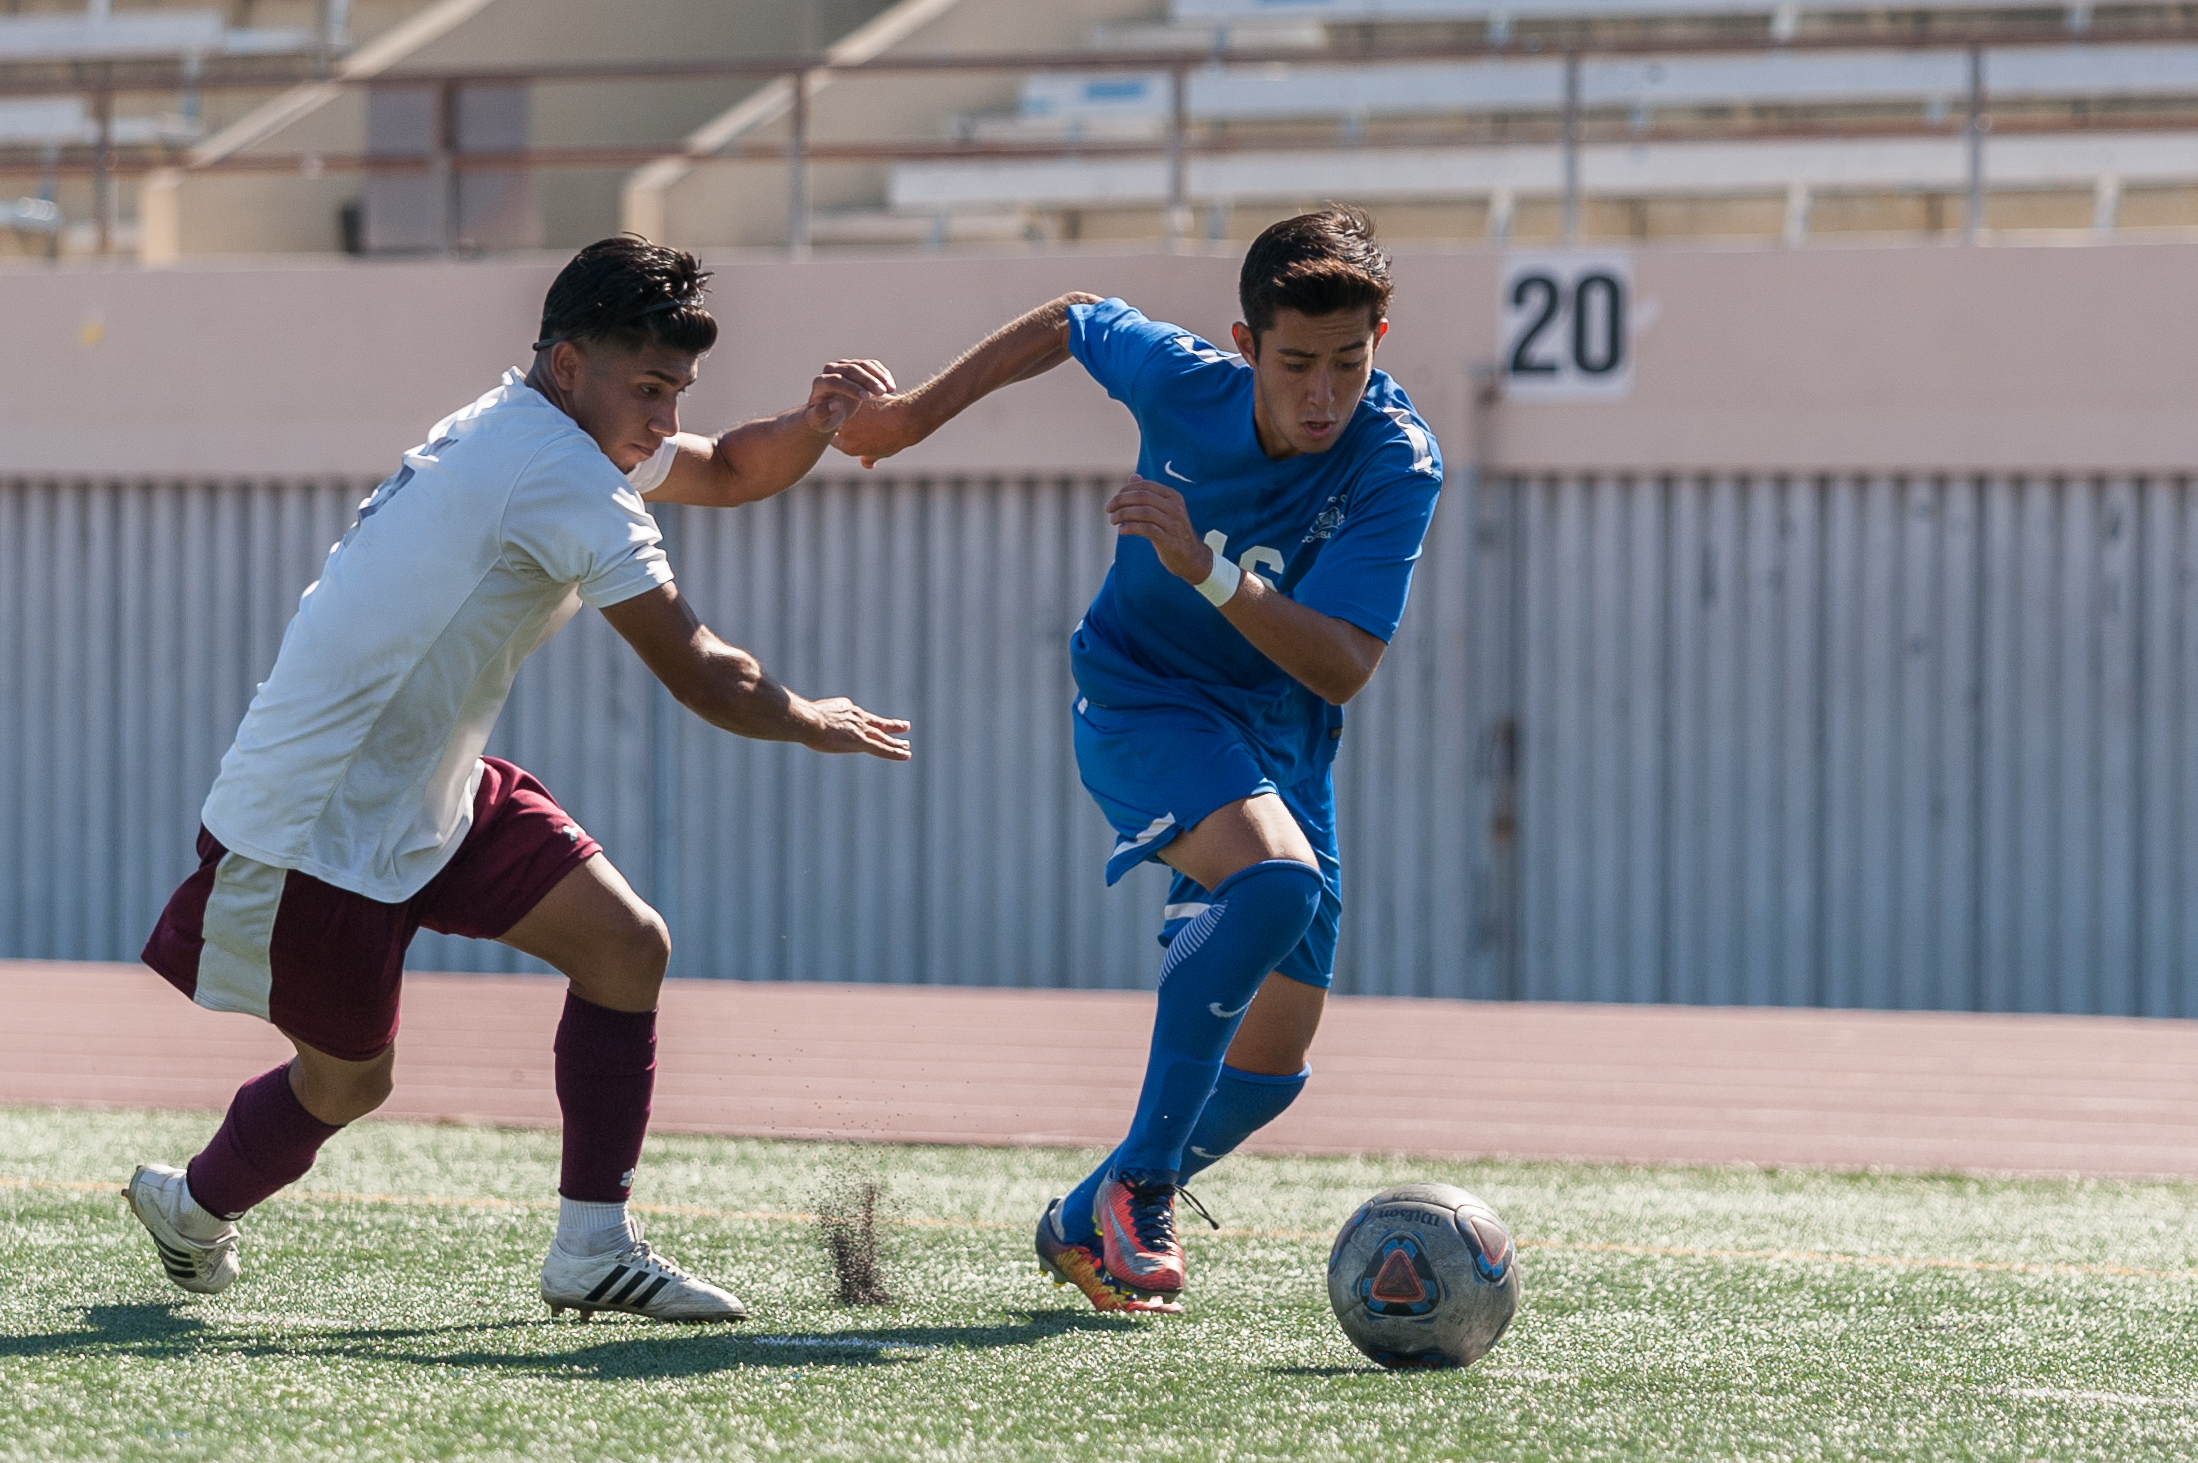  Midfielder Carlos Rincon (16,right) moves the ball up the field while being contested by Angel Barajas (5,left) of Victor Valley College. The Santa Monica College Corsairs won the game 2-0 against the Victor Valley Rams. The match was held at the Co